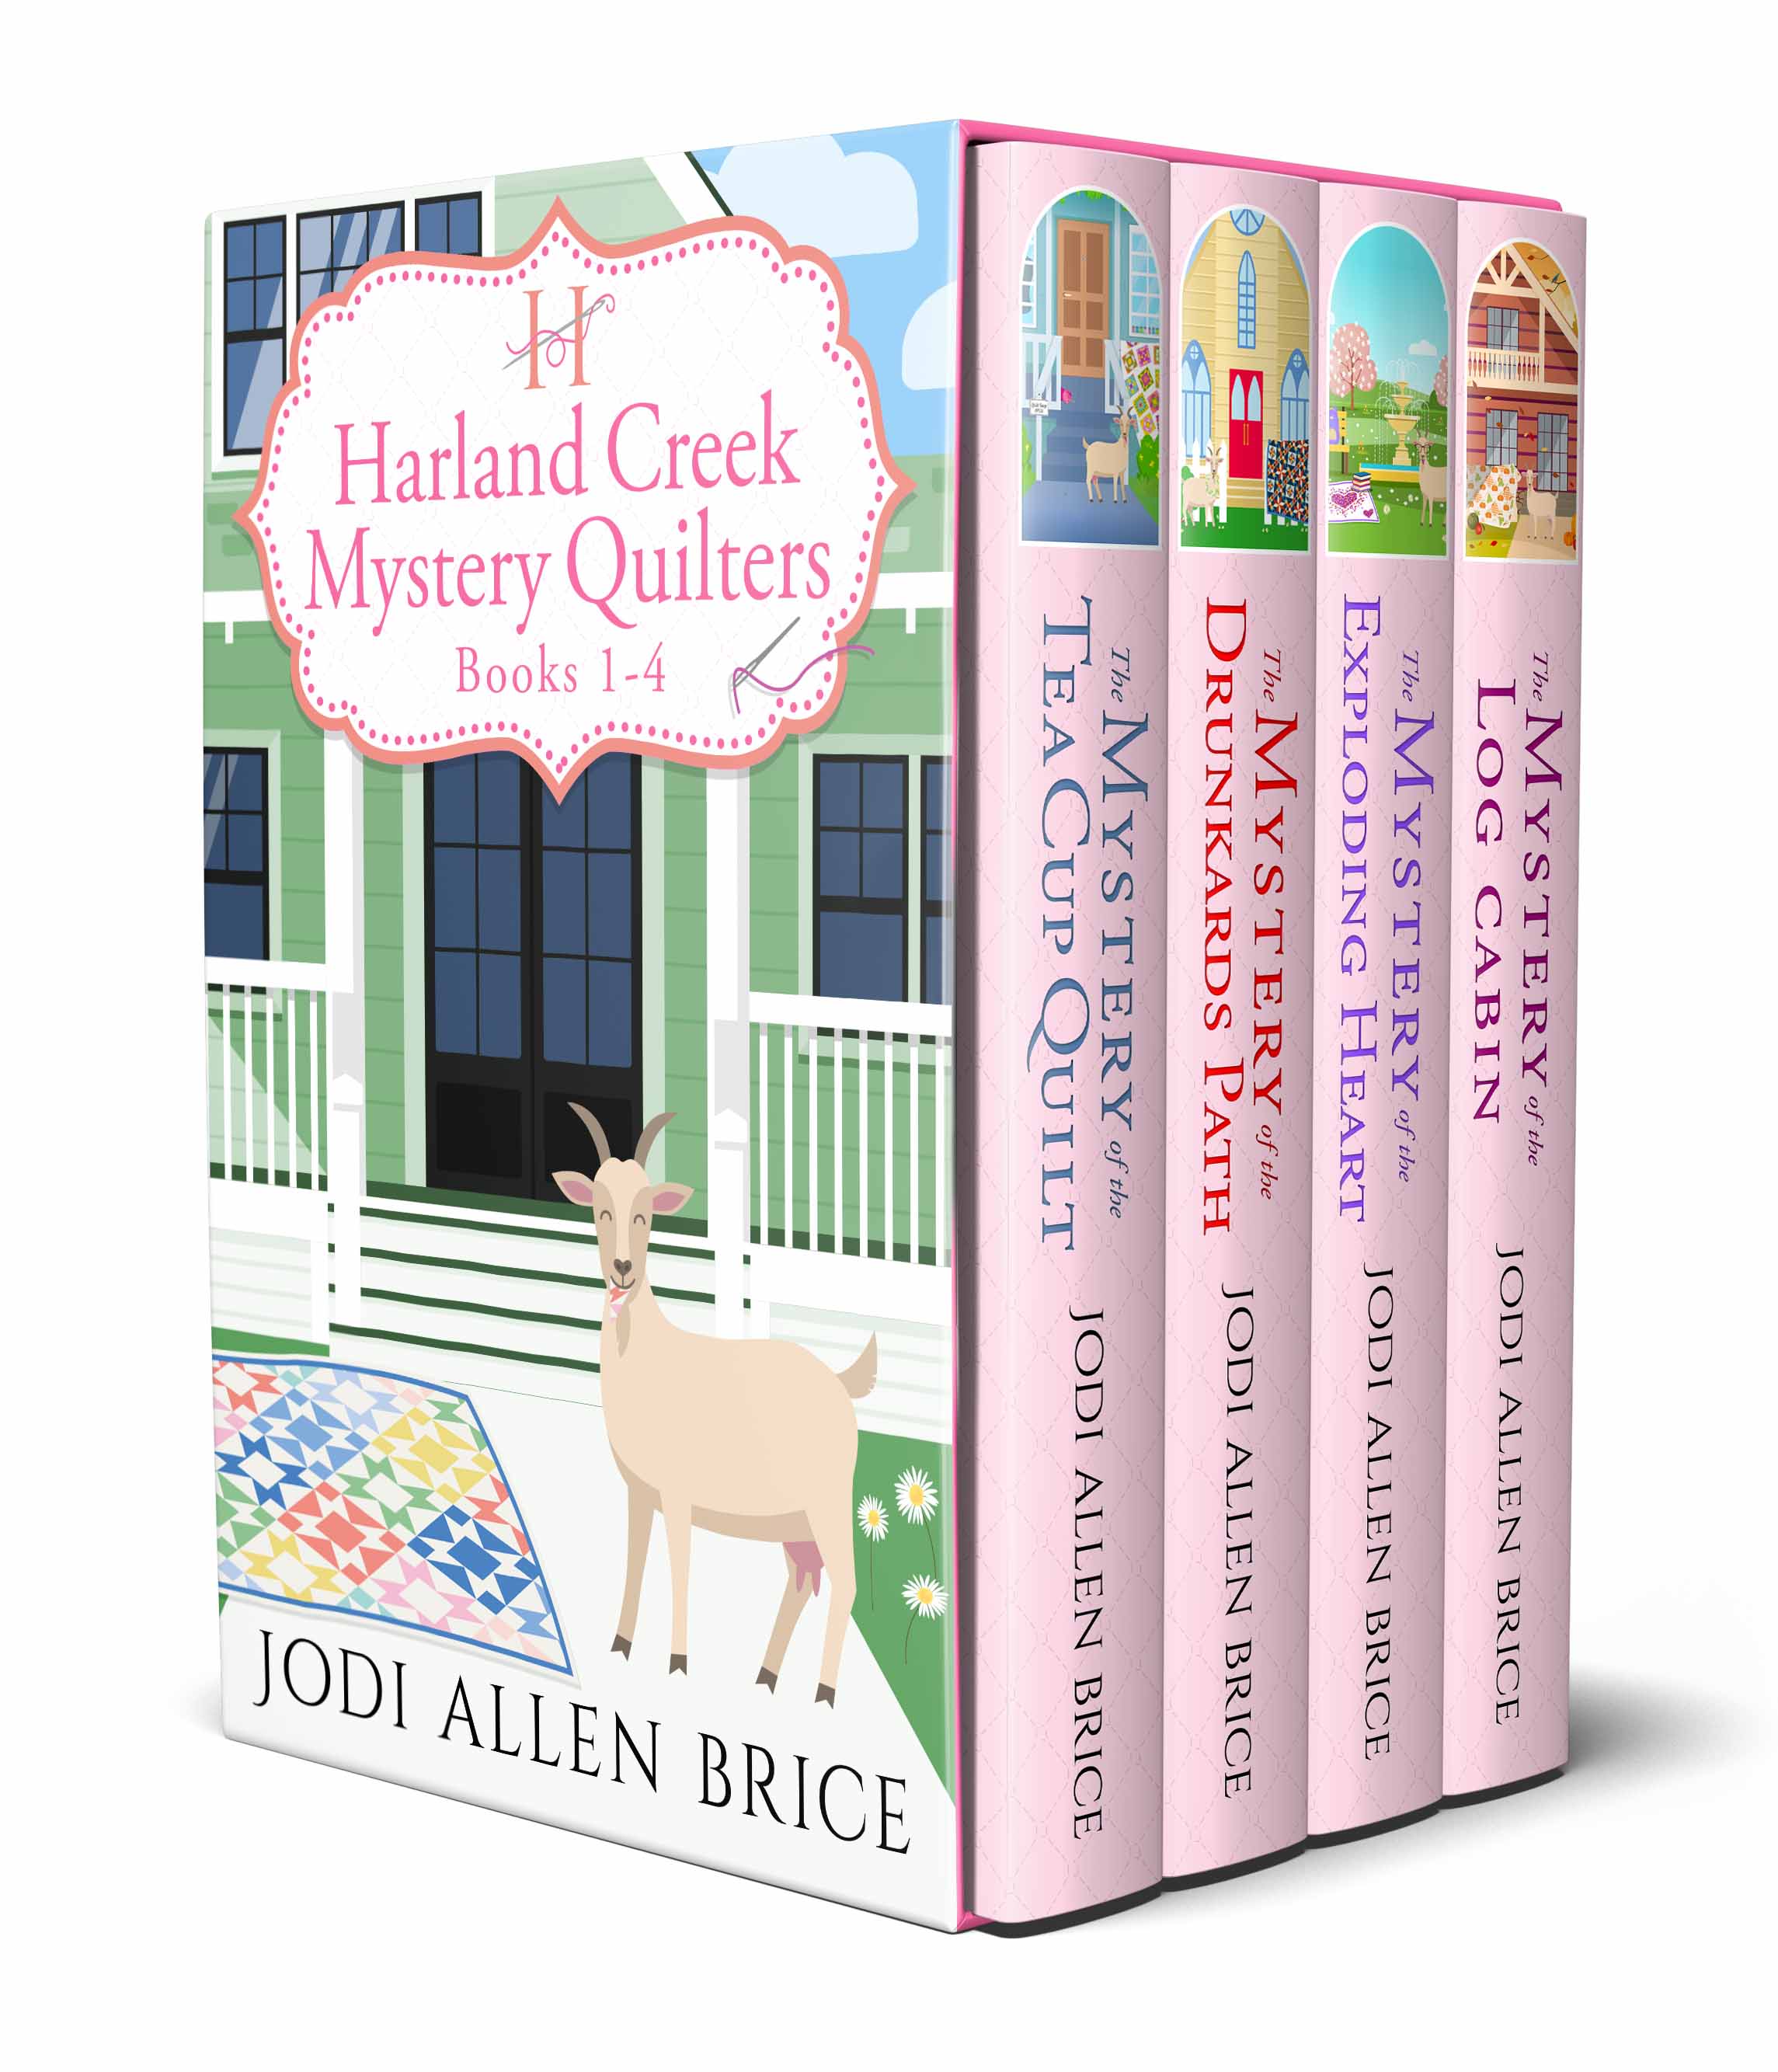 Harland Creek Mystery Quilters Bundle 1-4